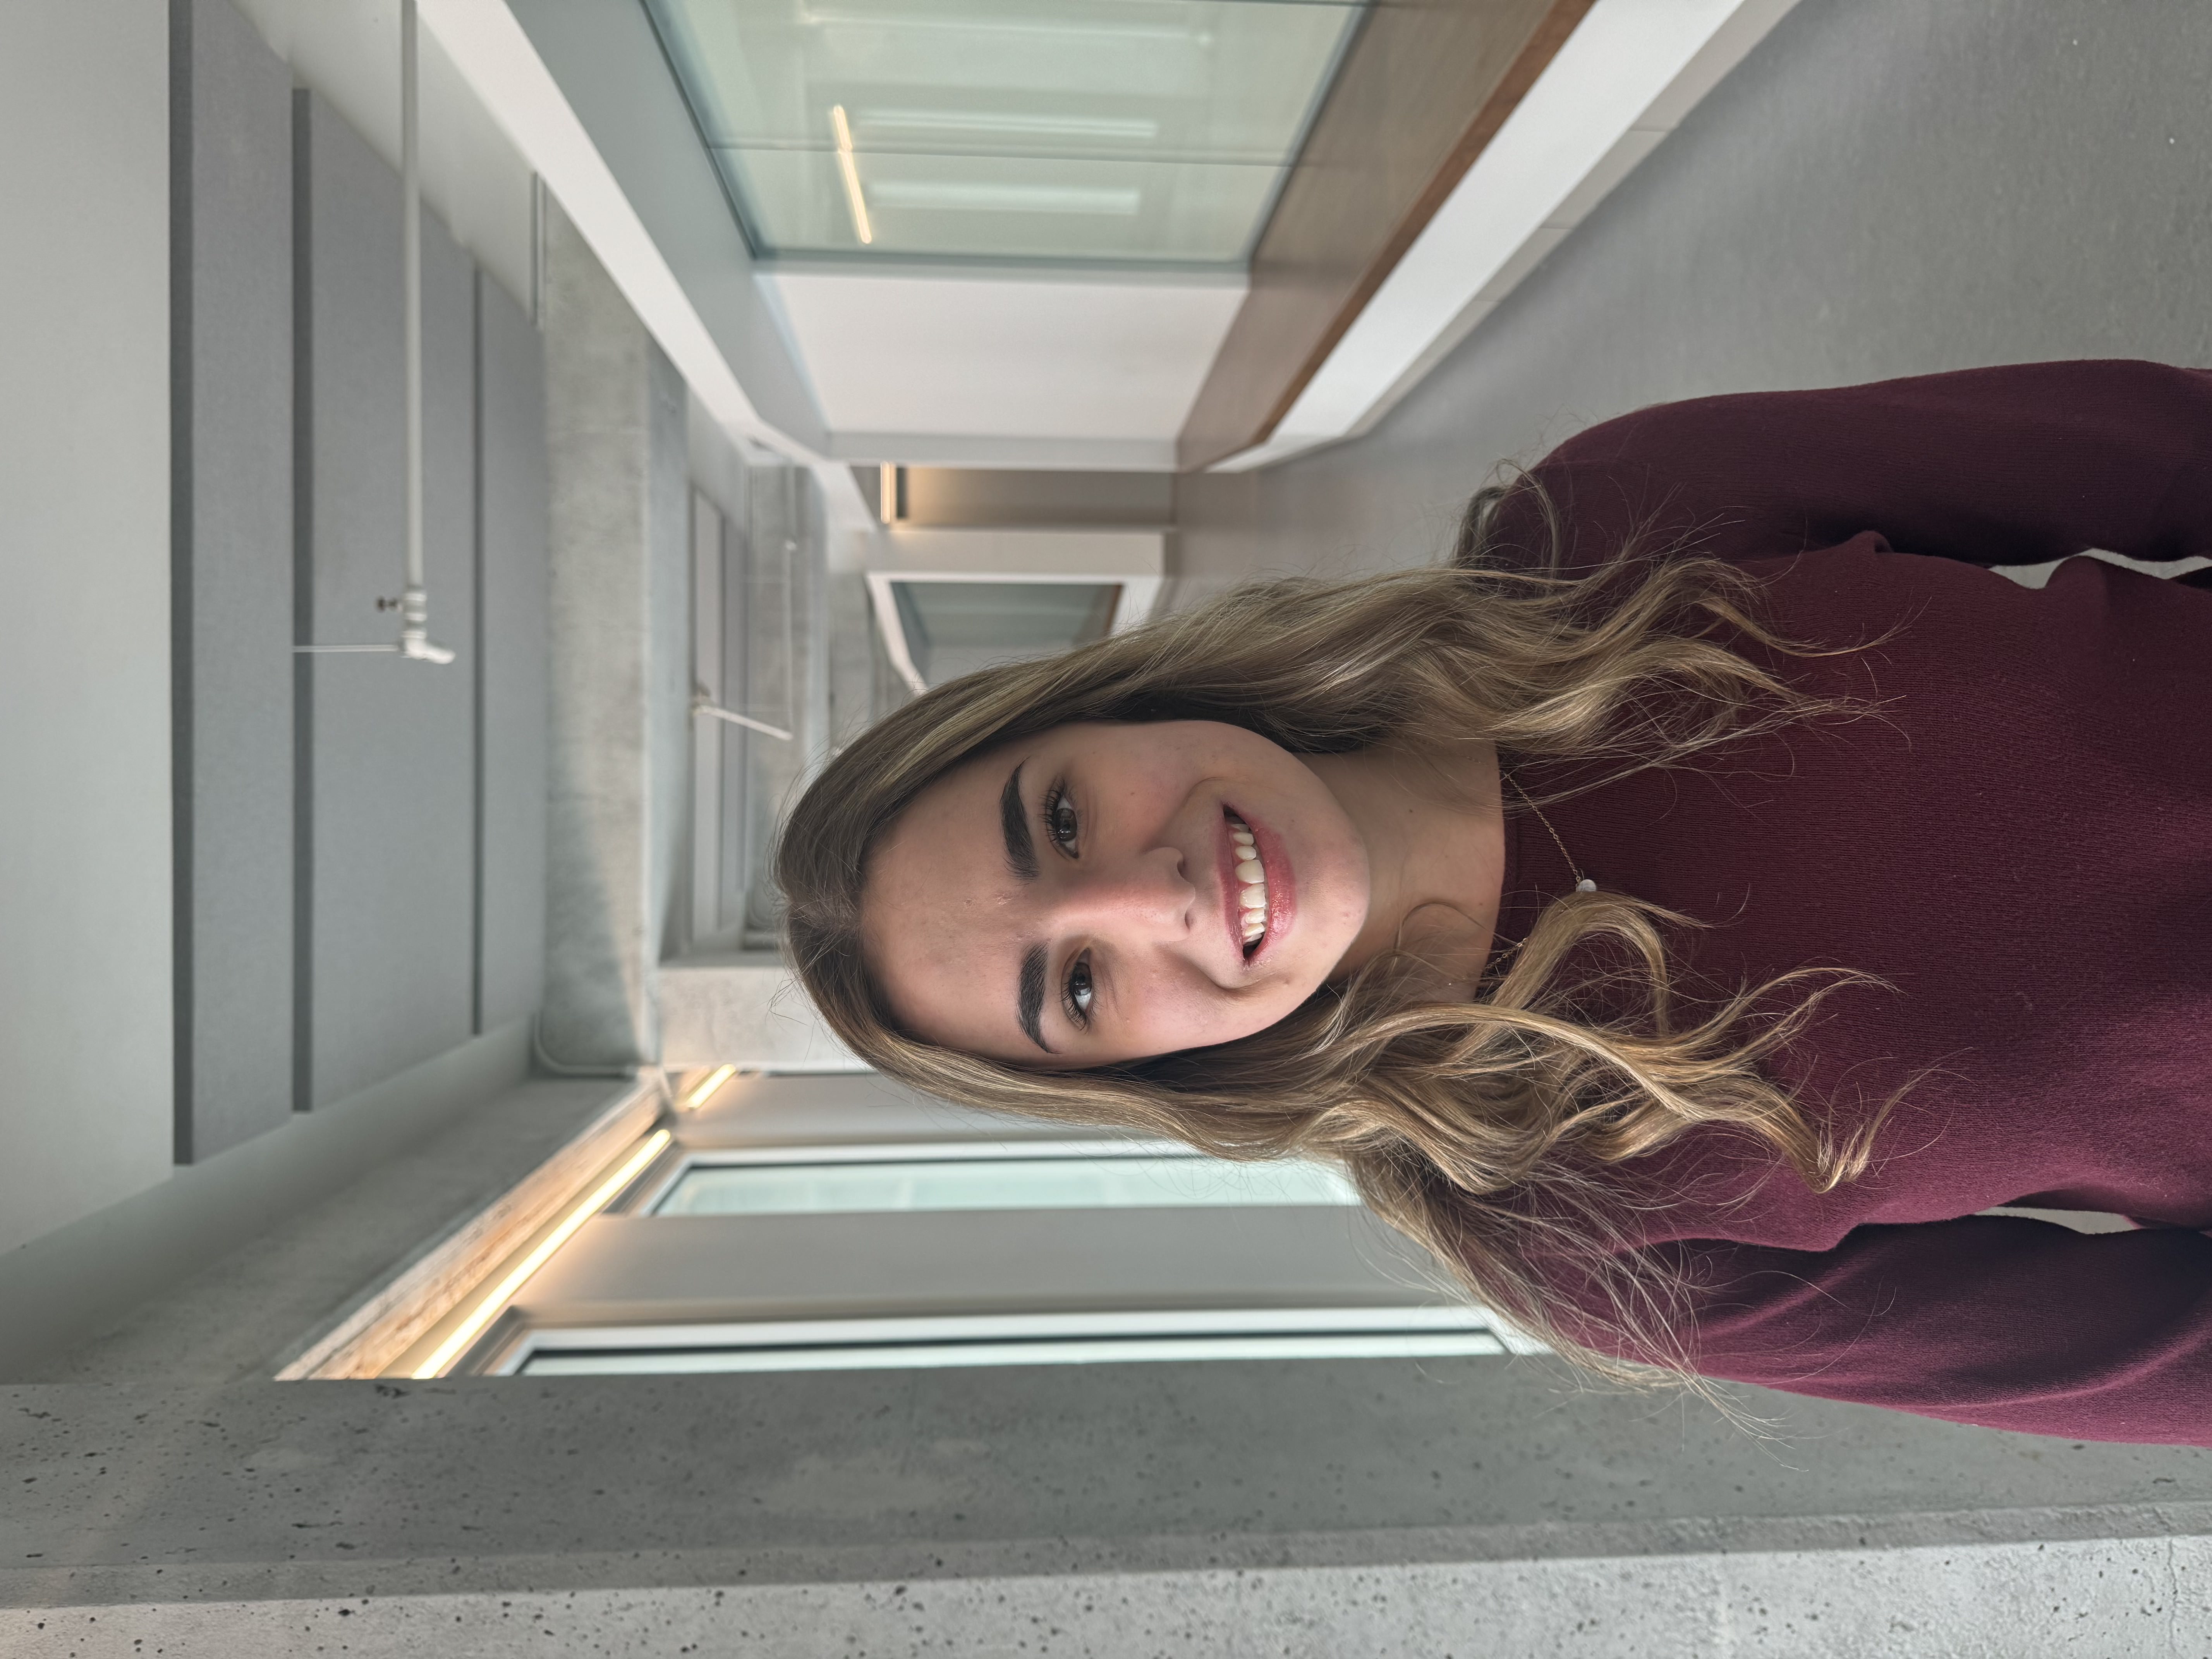 Meet Maria Gravini! Enjoys the outdoors, spending time with family and friends, 
                and trying new coffee shops. Fun fact: has a golden doodle puppy named Manolo.